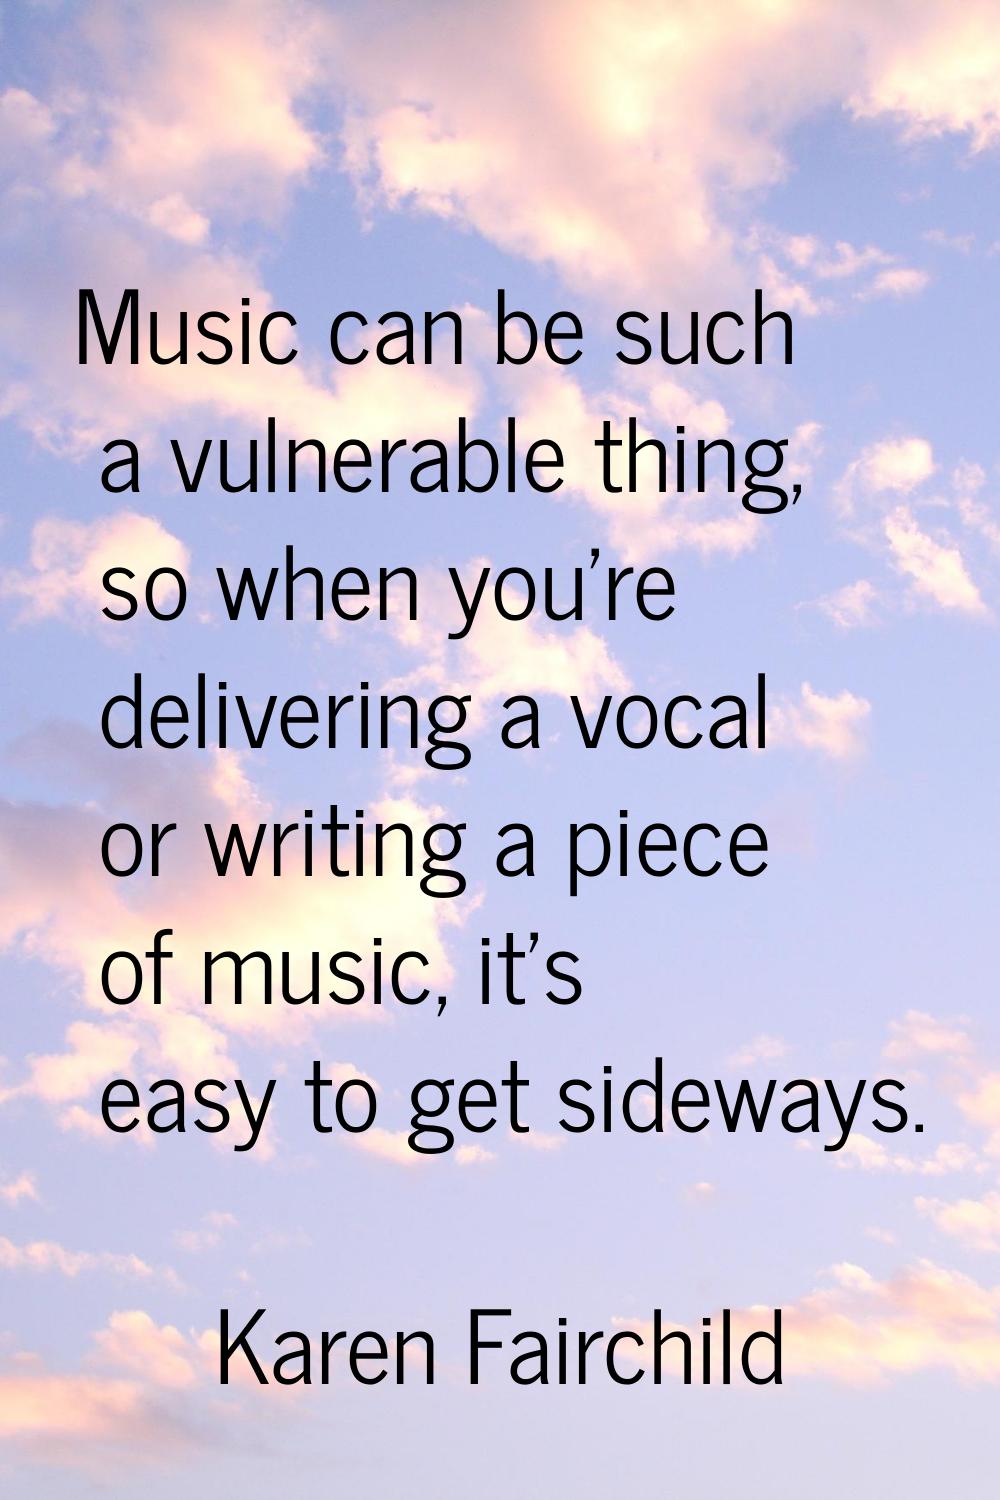 Music can be such a vulnerable thing, so when you're delivering a vocal or writing a piece of music